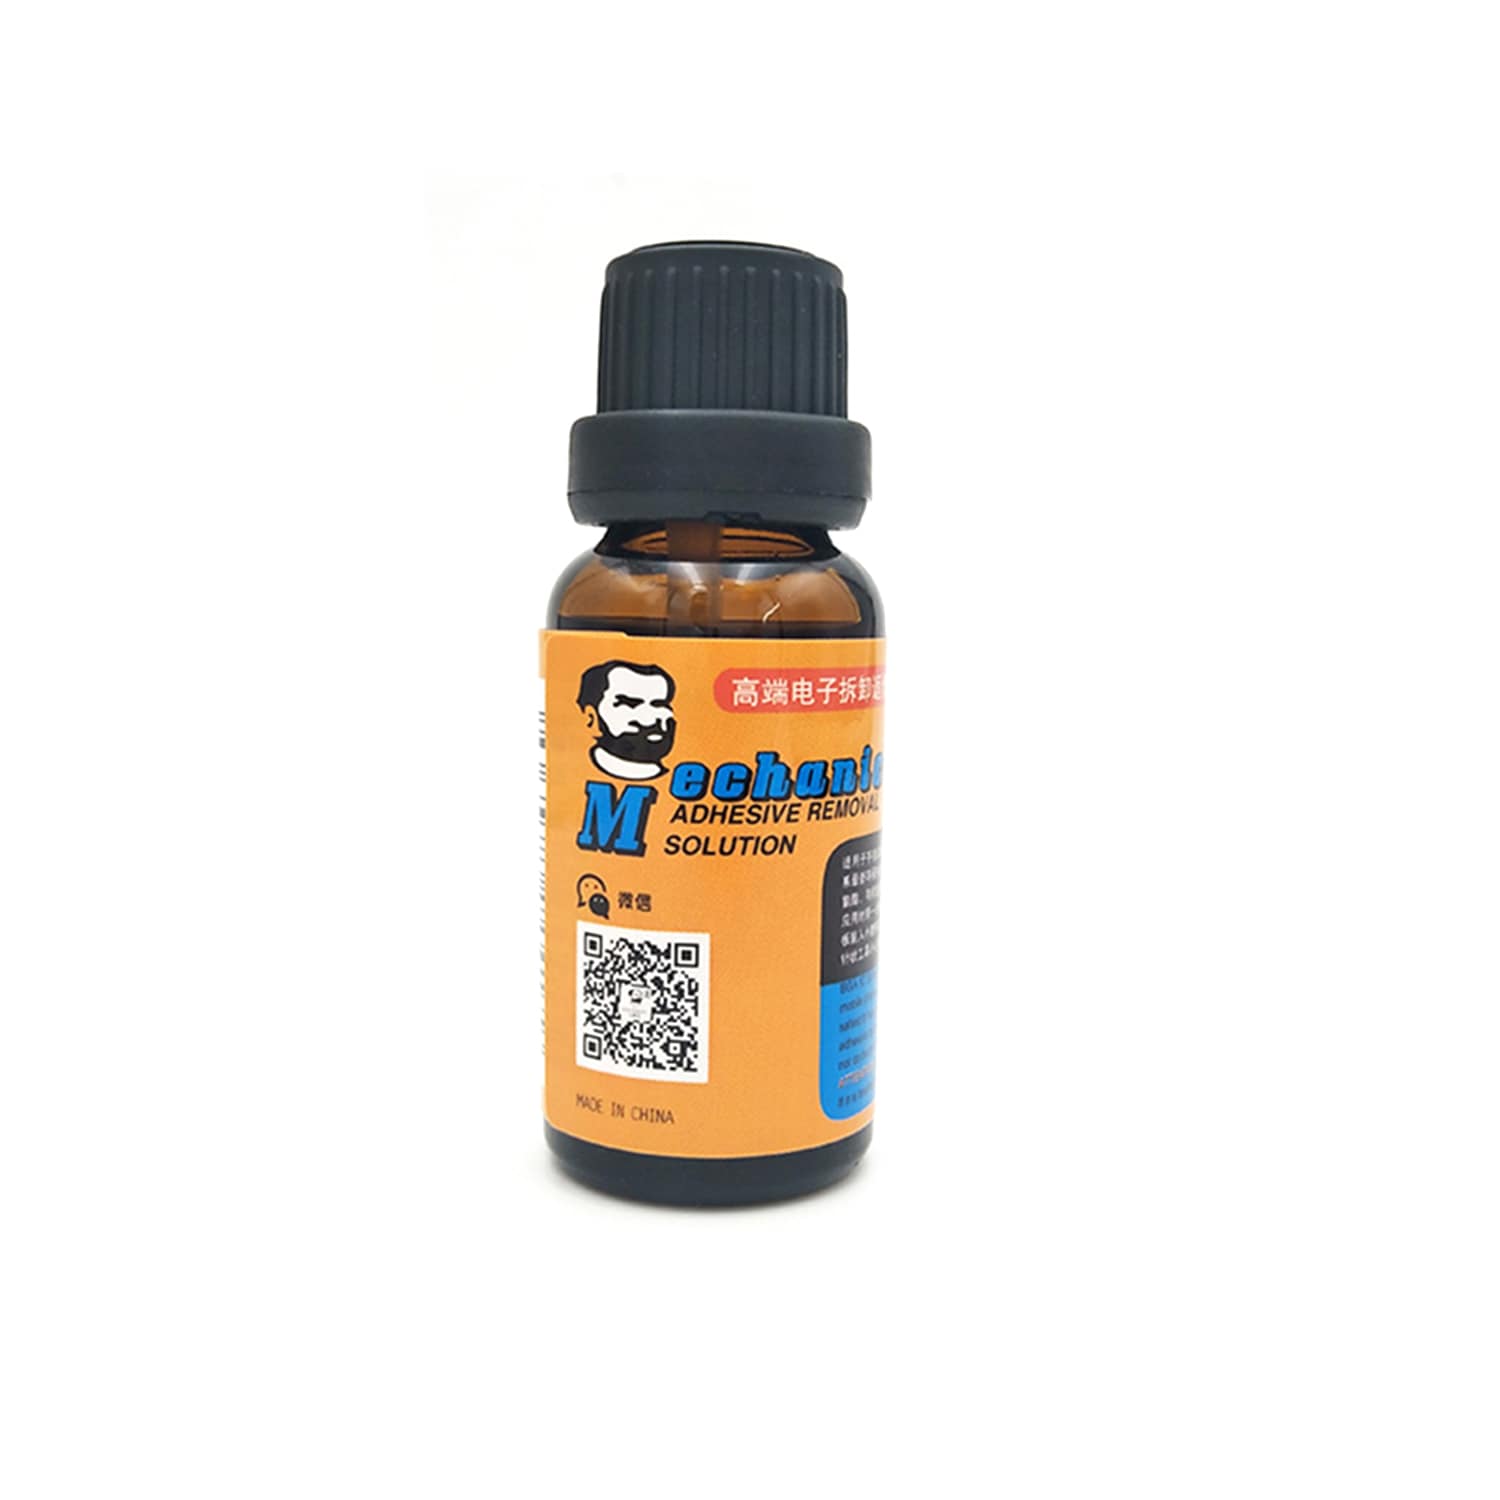 Jstech Glue Remover, Liquid, Packaging Size: 200 ml at Rs 65/piece in Mumbai